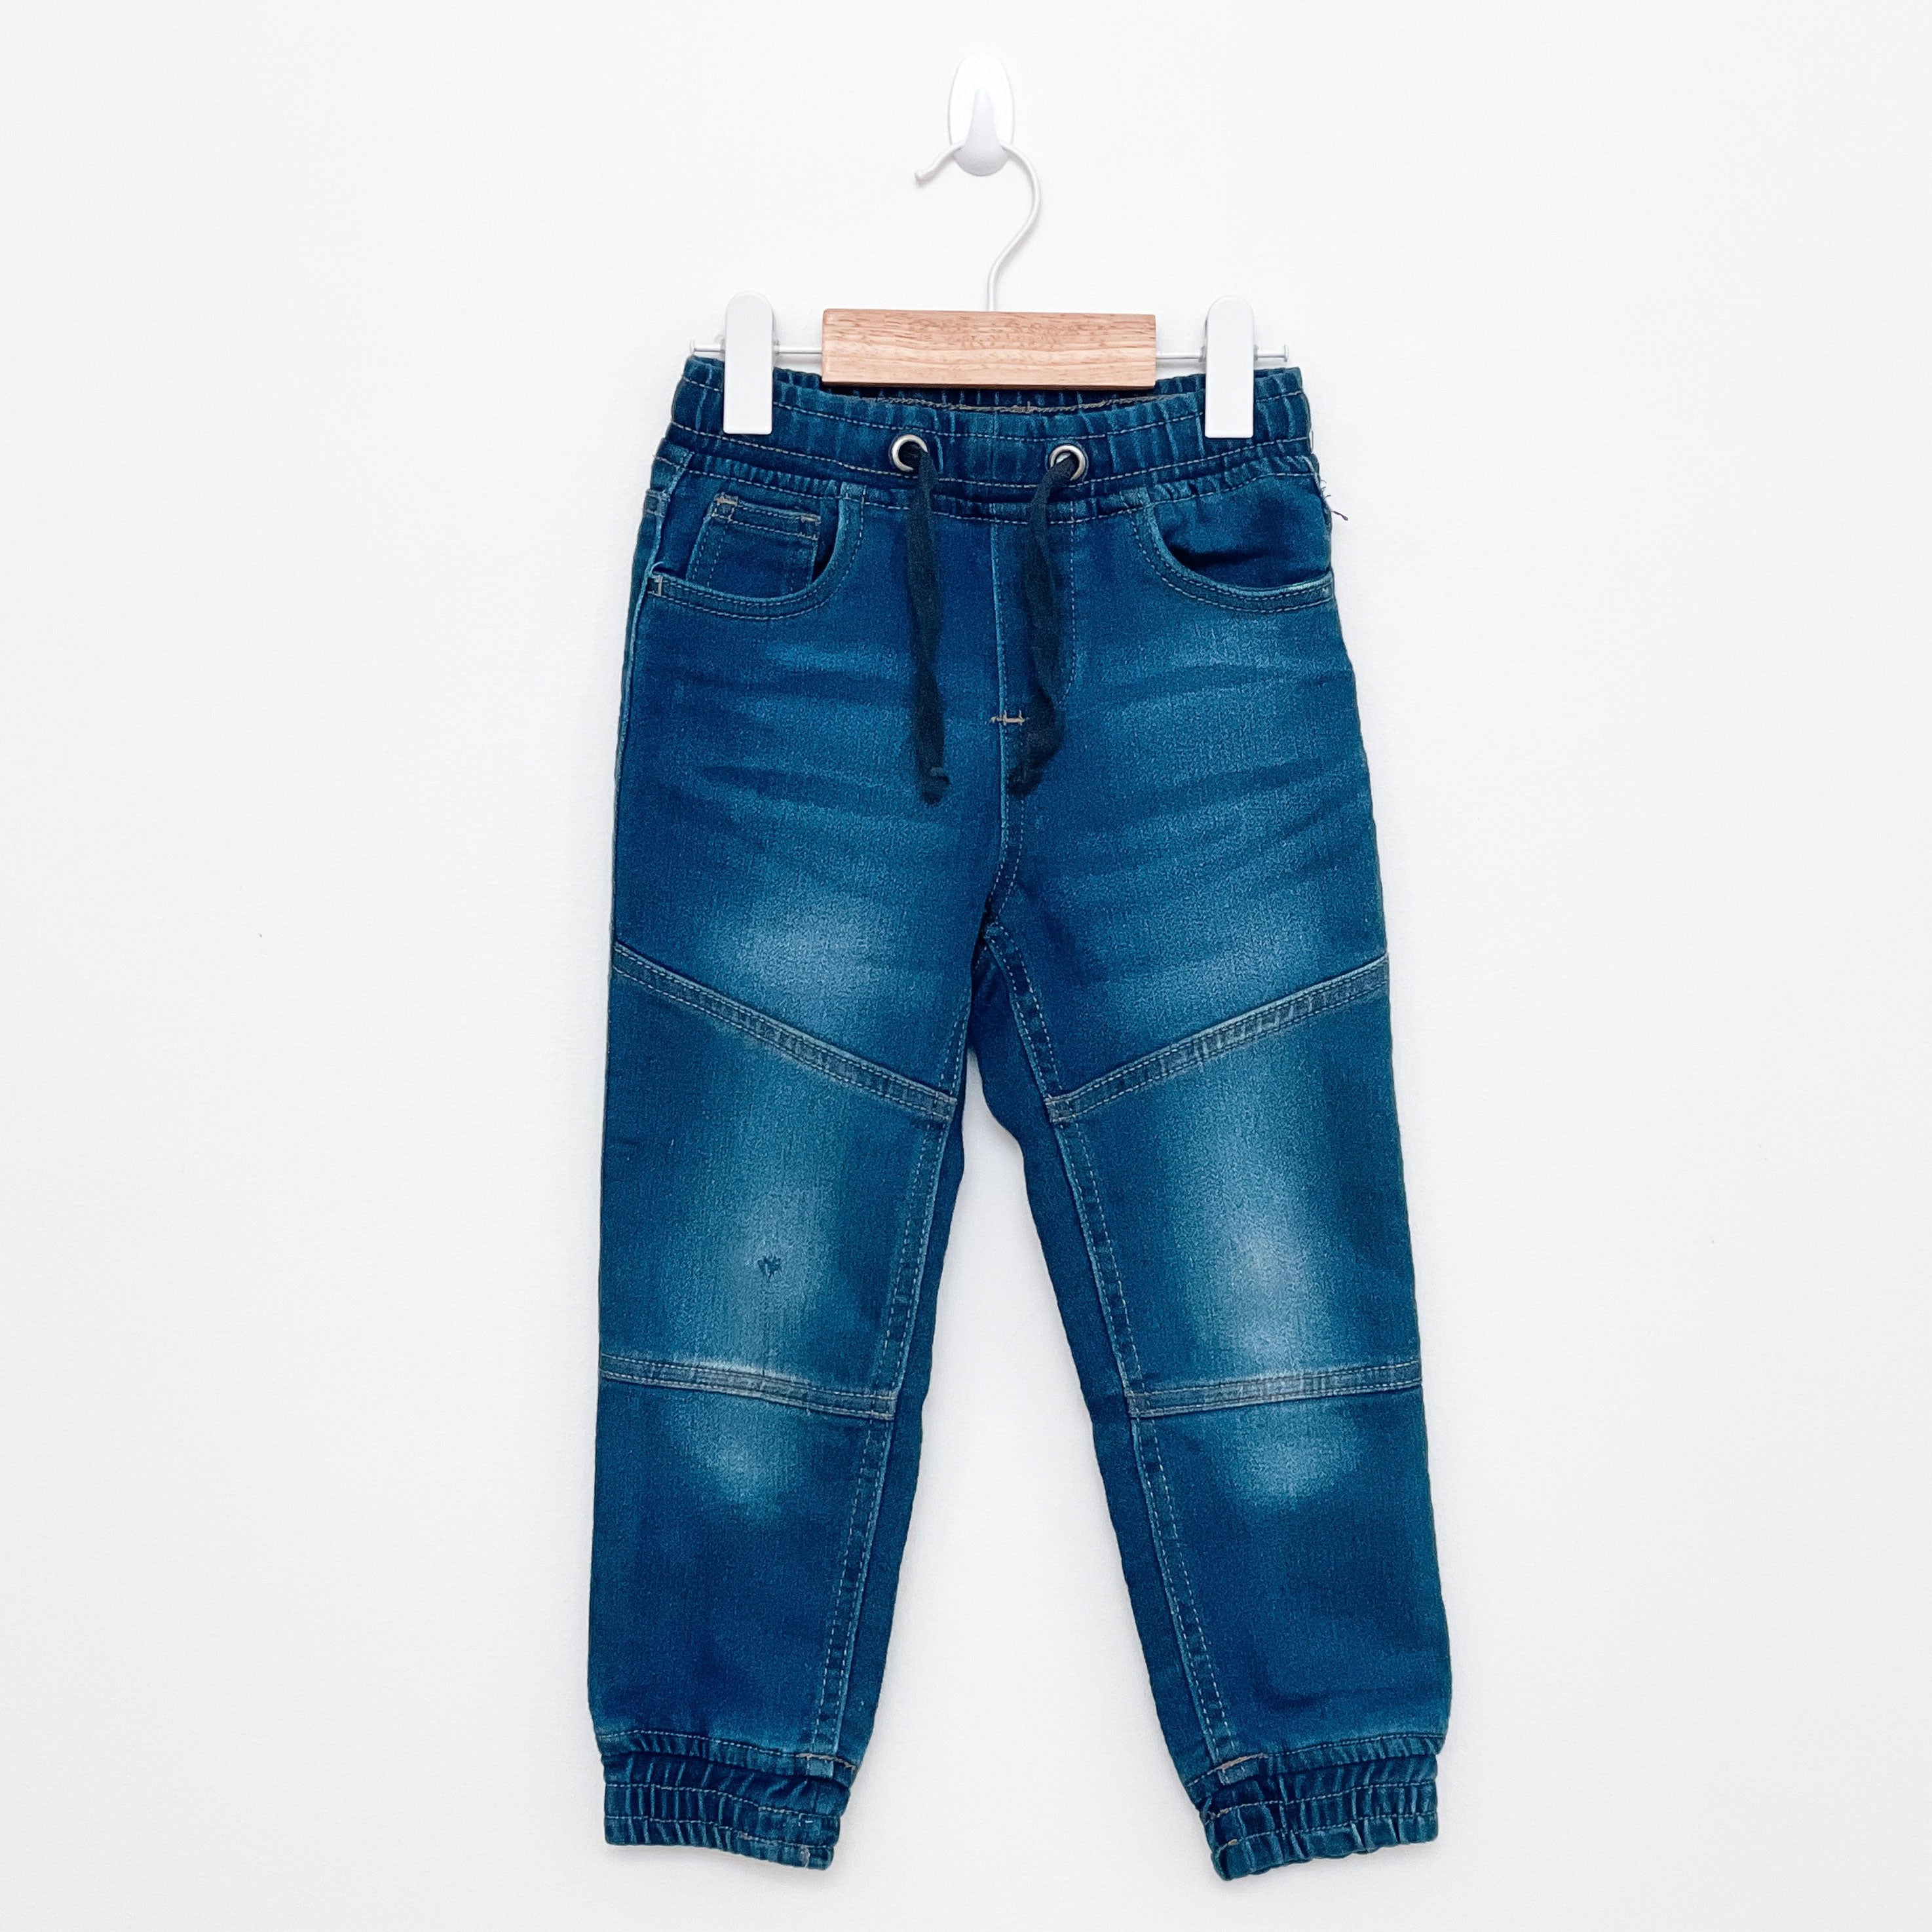 Toddler jeans (98) – The Rewear Company